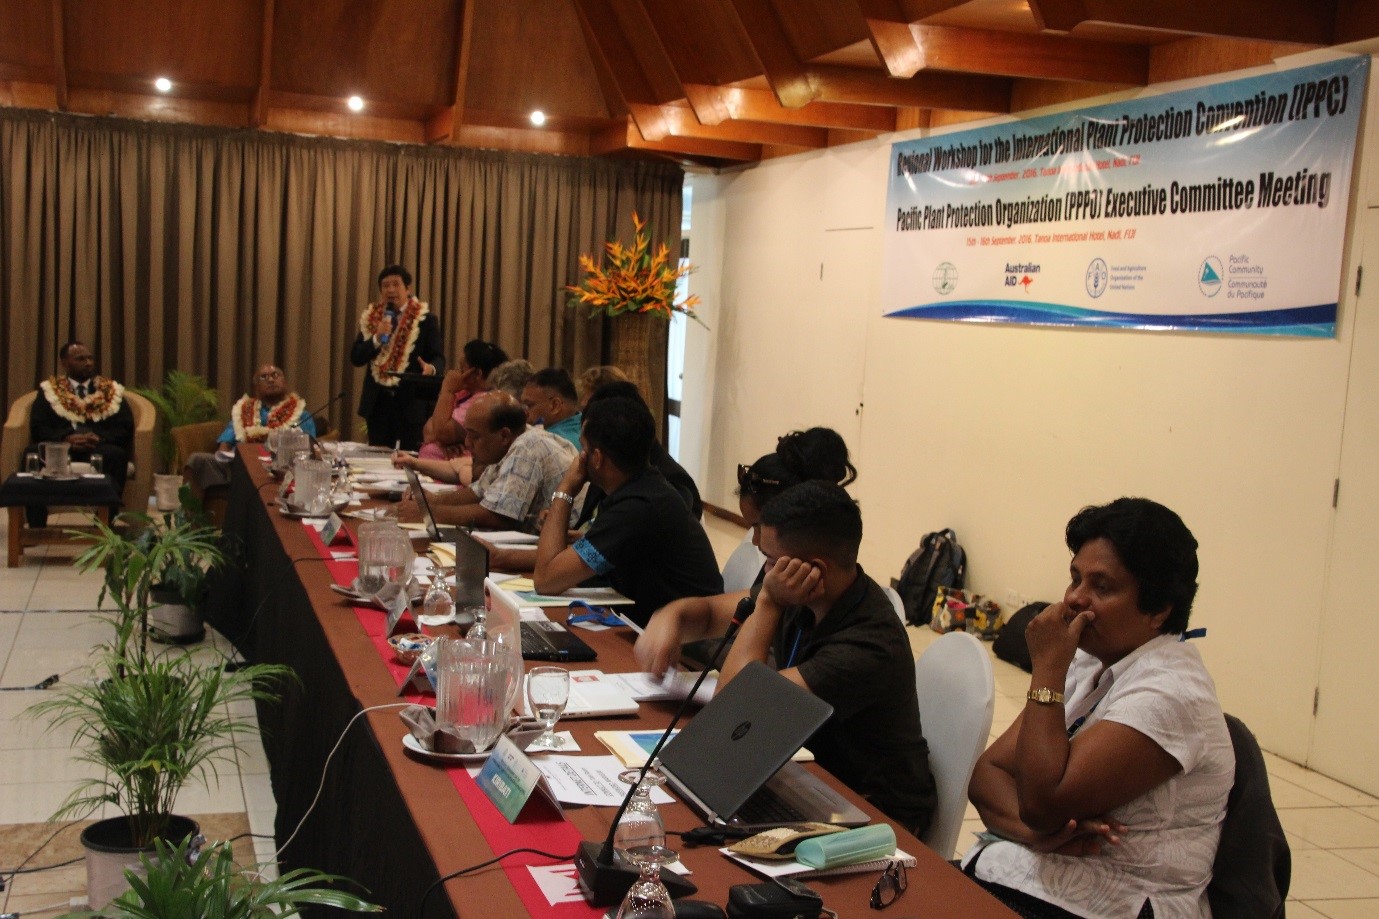 2016 IPPC Regional Workshop for the South West Pacific 